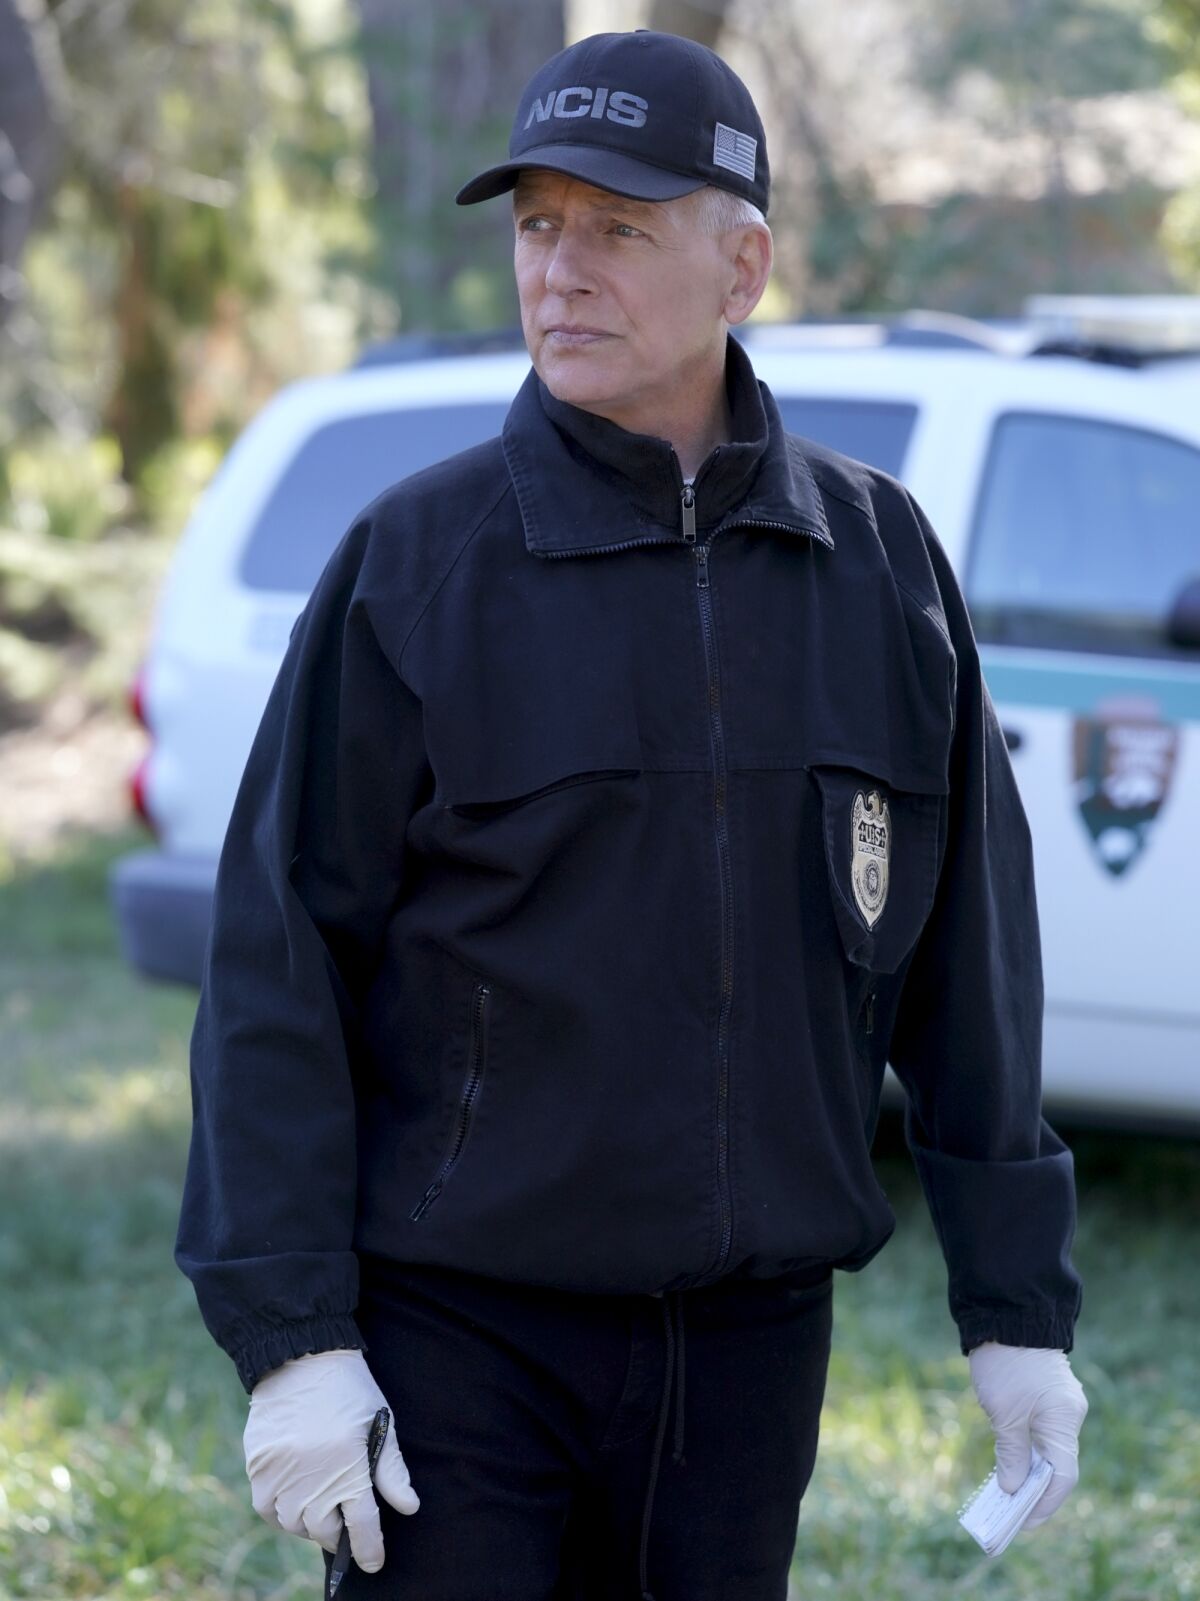 "NCIS," starring Mark Harmon, was the highest-rated show in the week of March 23-29 and helped propel CBS to the top of the network ratings.